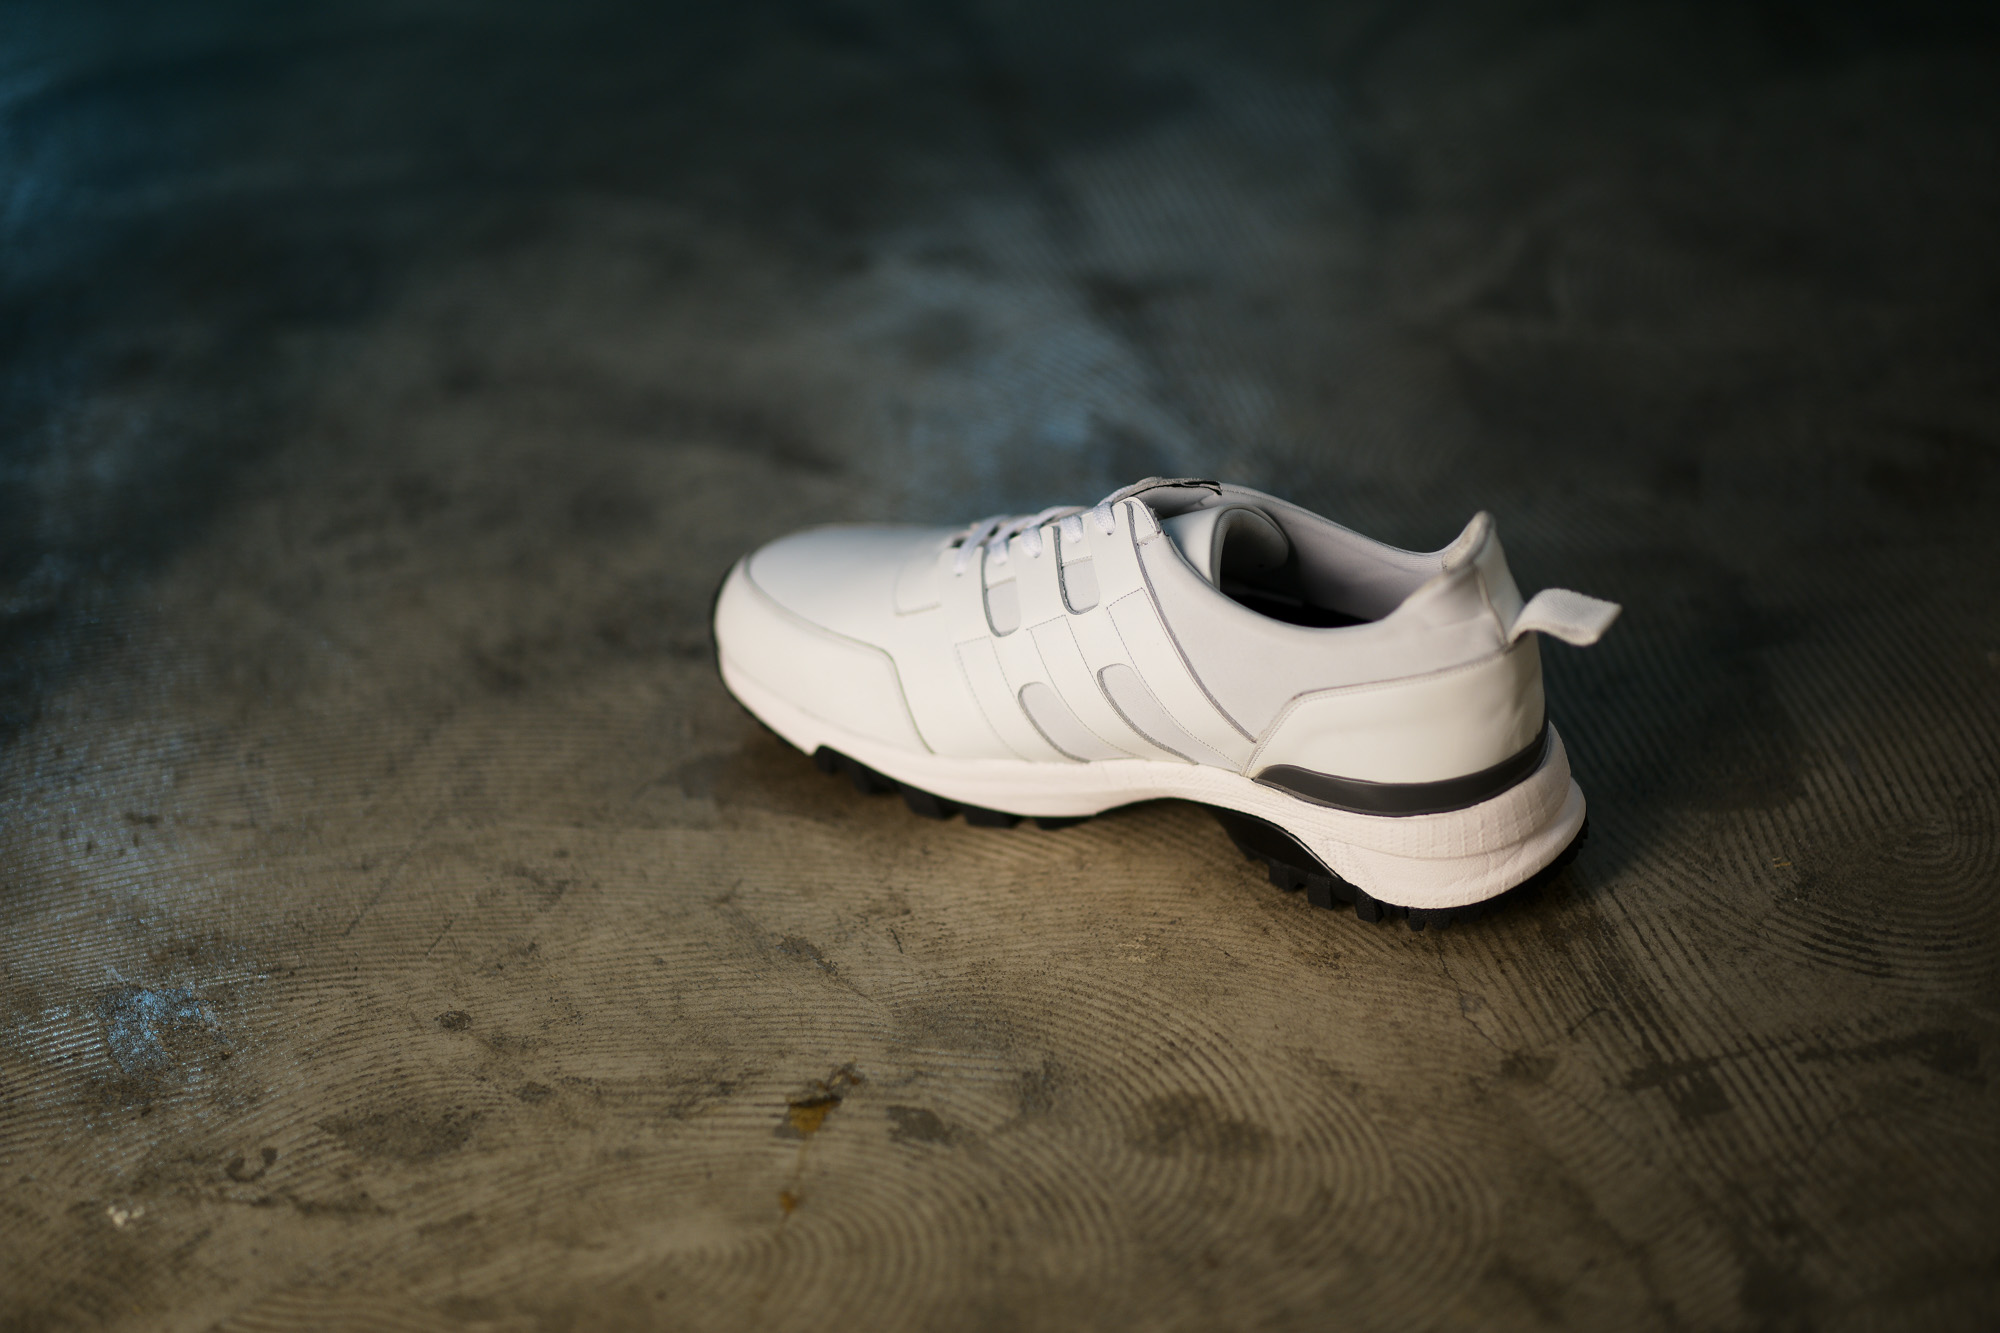 WH (ダブルエイチ) WH-0111 Faster Last(ファスターラスト) Sneakers スニーカー WHITE×WHITE (ホワイト×ホワイト) MADE IN JAPAN (日本製) 2019 秋冬【ご予約受付開始】 愛知 名古屋 alto e diritto altoediritto アルトエデリット